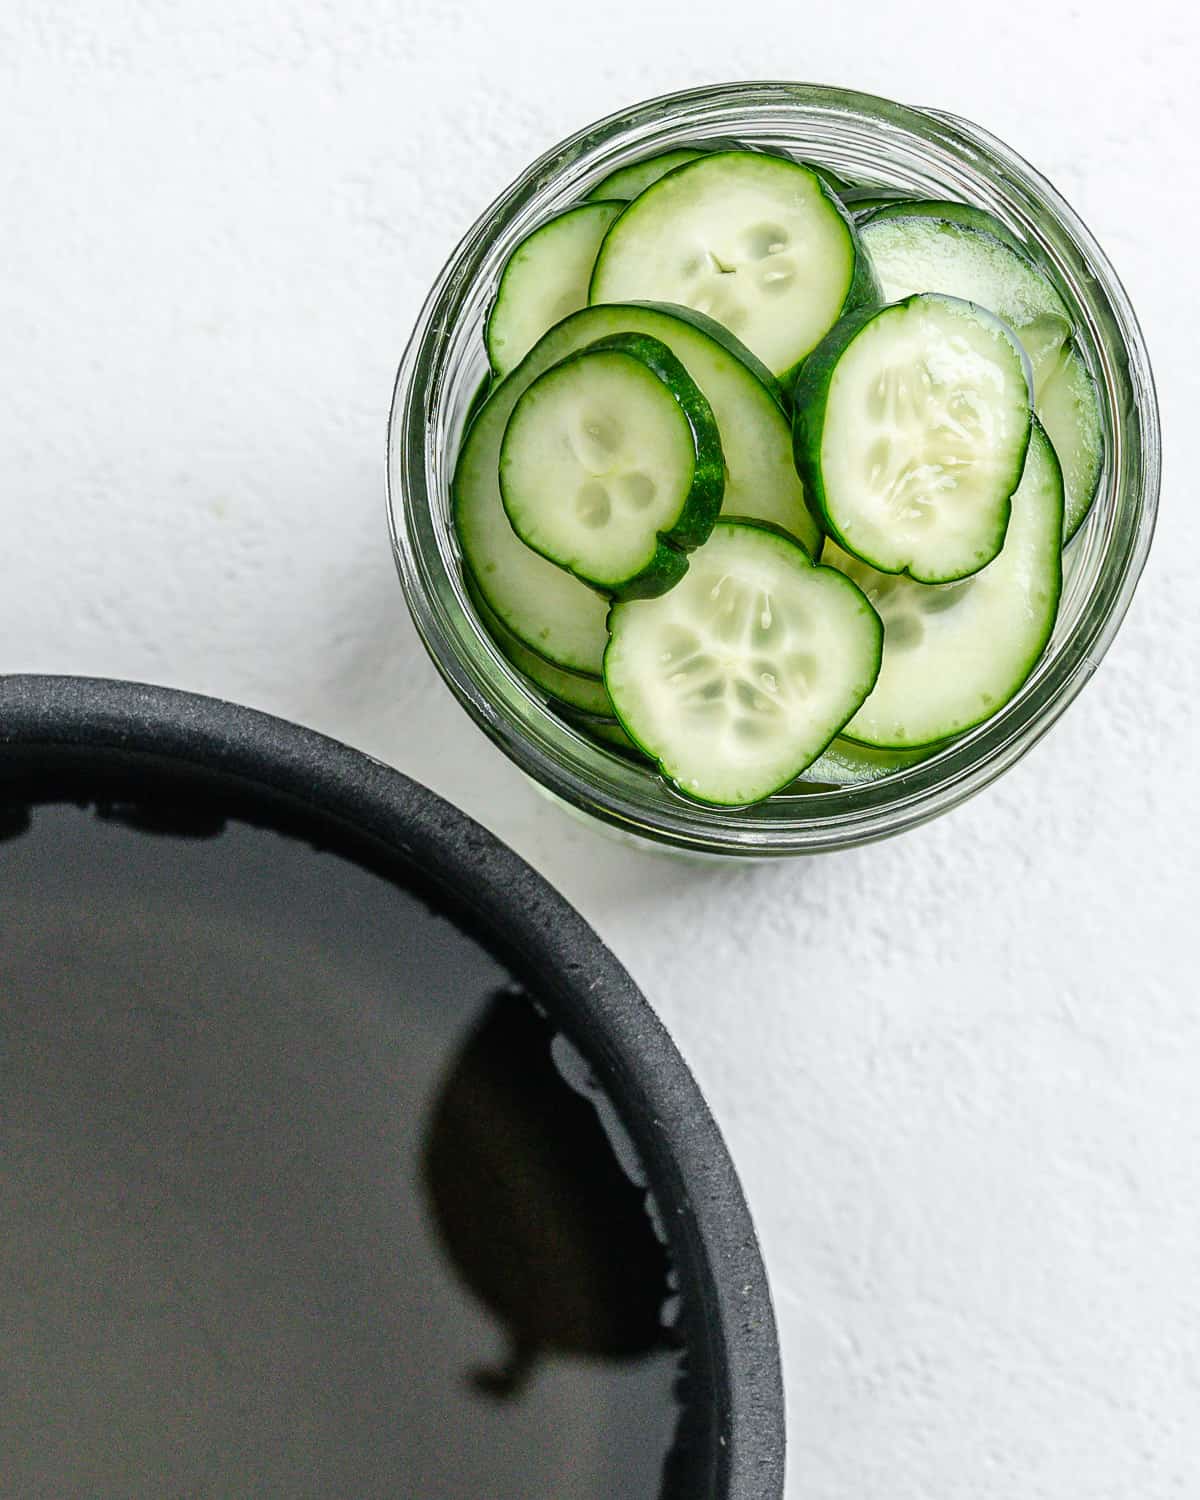 small bowl of cucumbers alongside a black pan against a white surface